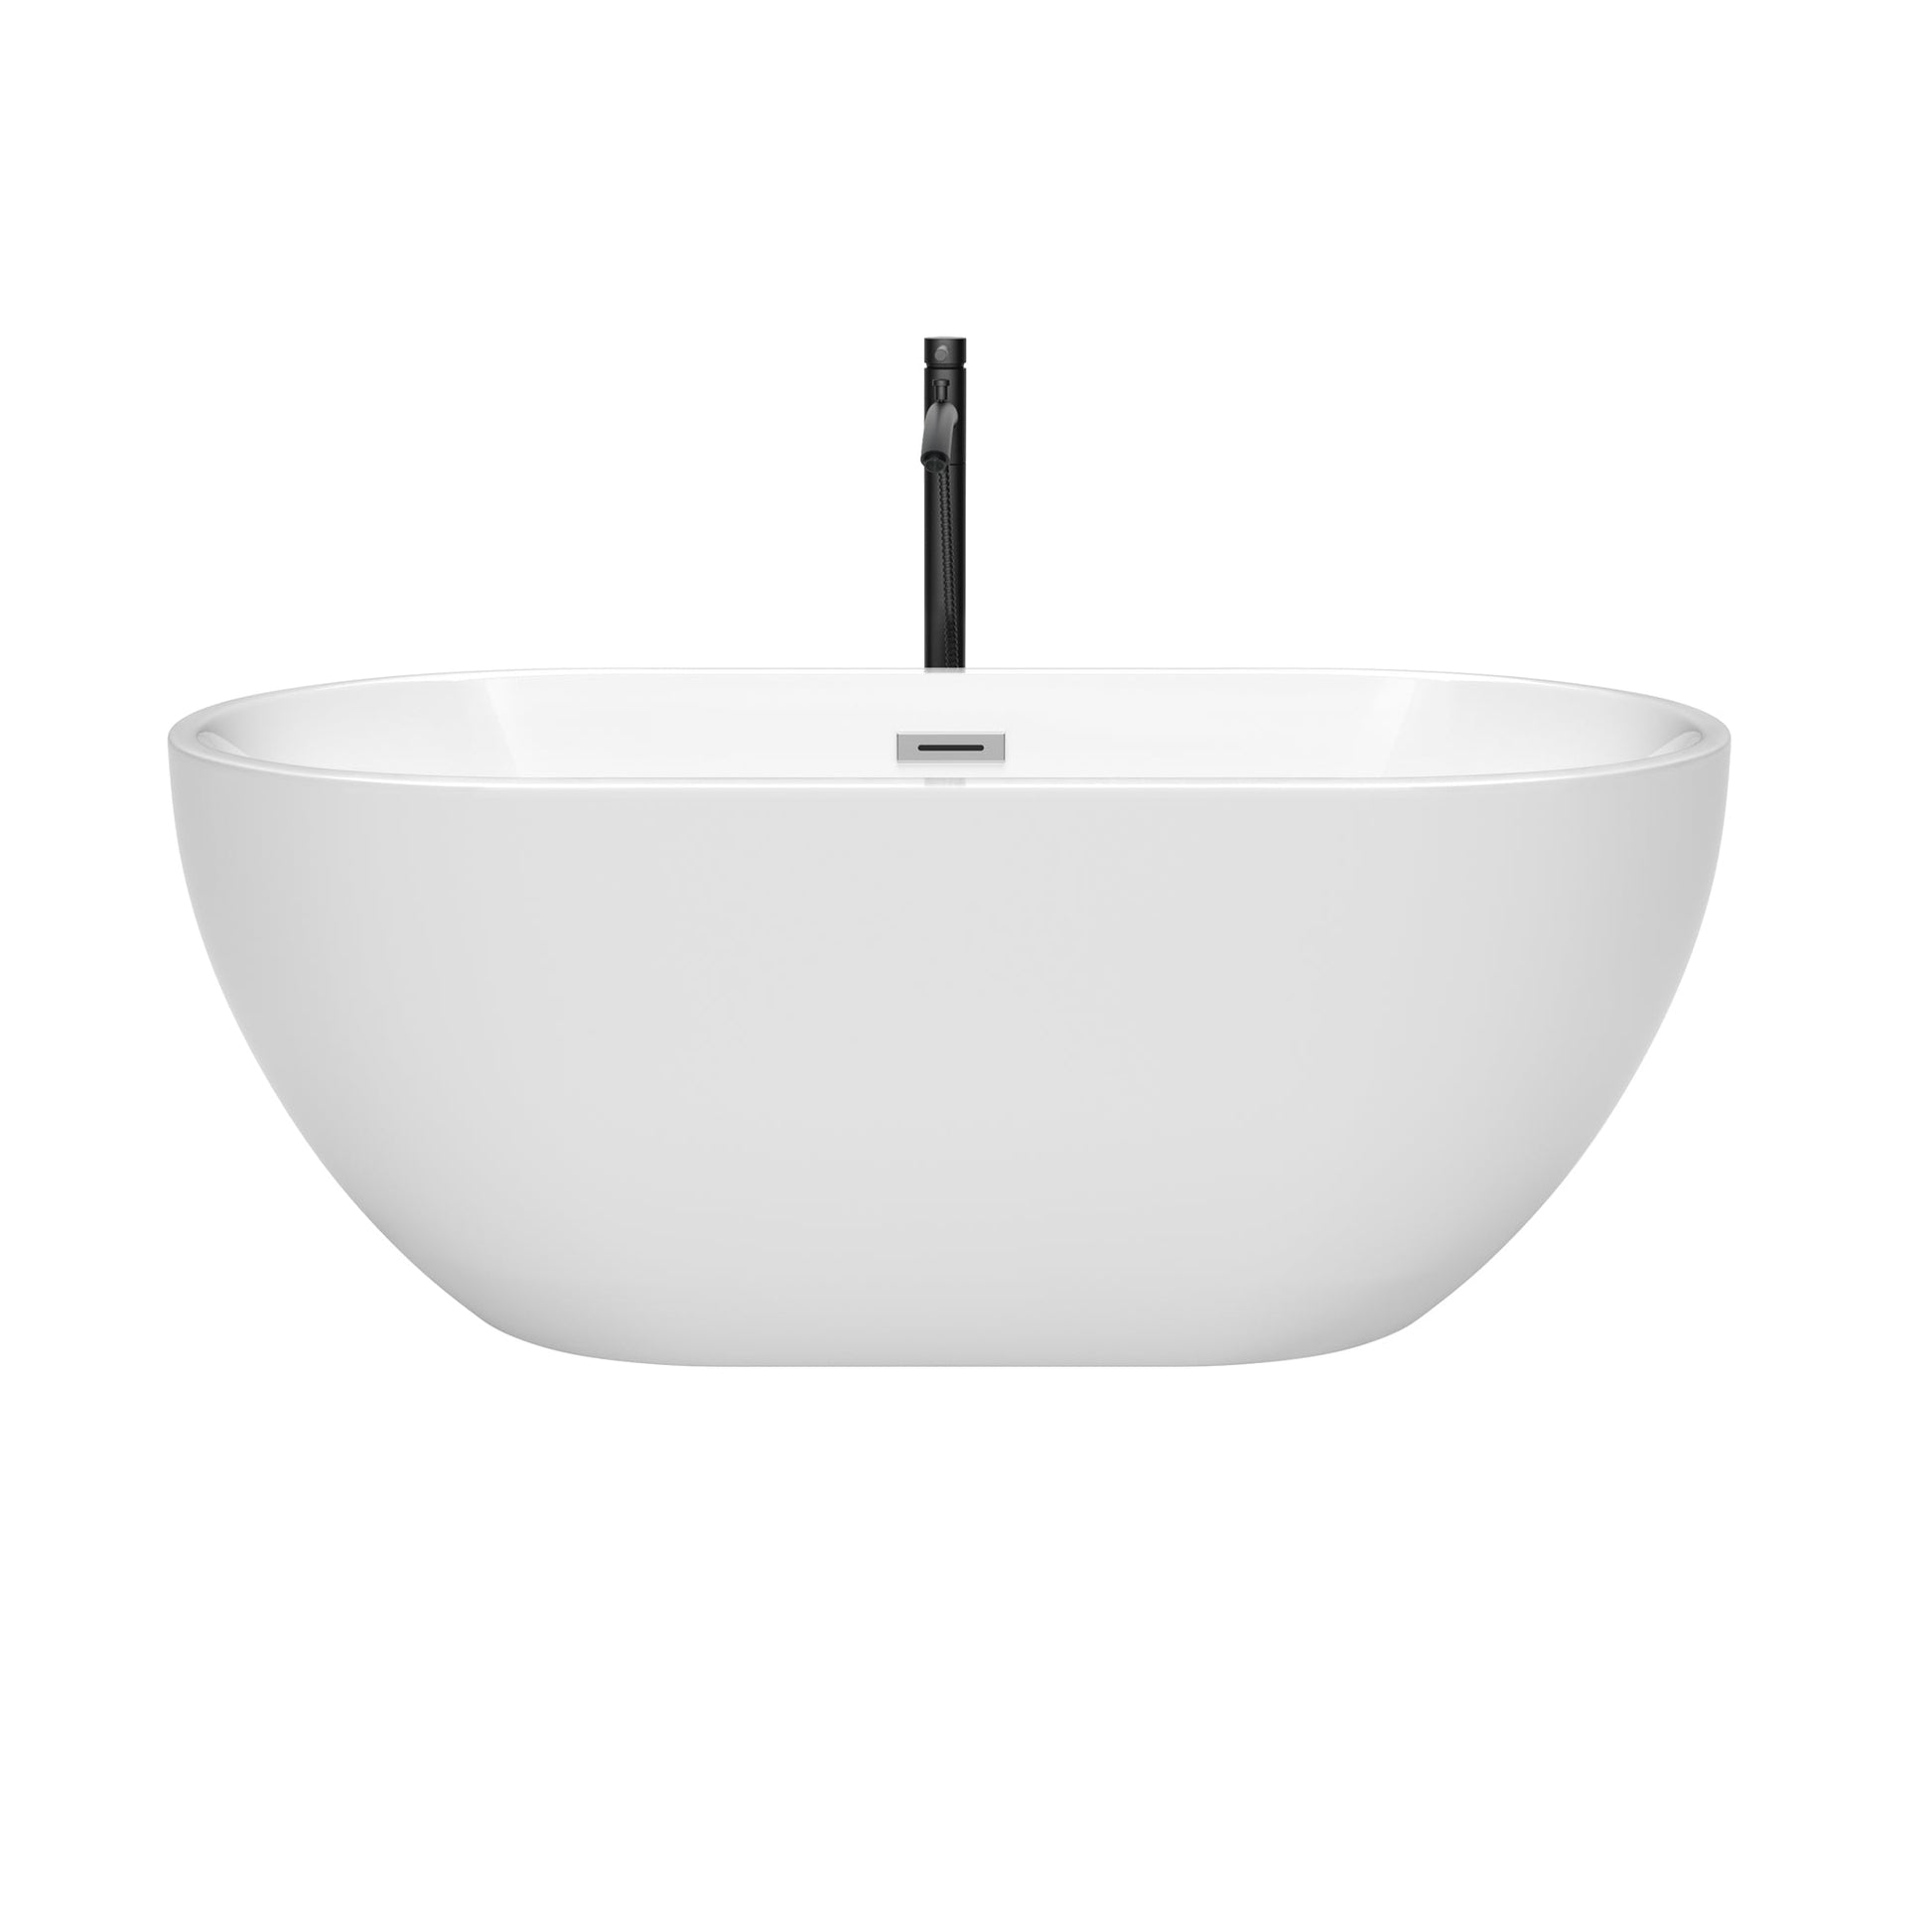 Wyndham Collection Brooklyn 60" Freestanding Bathtub in White With Polished Chrome Trim and Floor Mounted Faucet in Matte Black